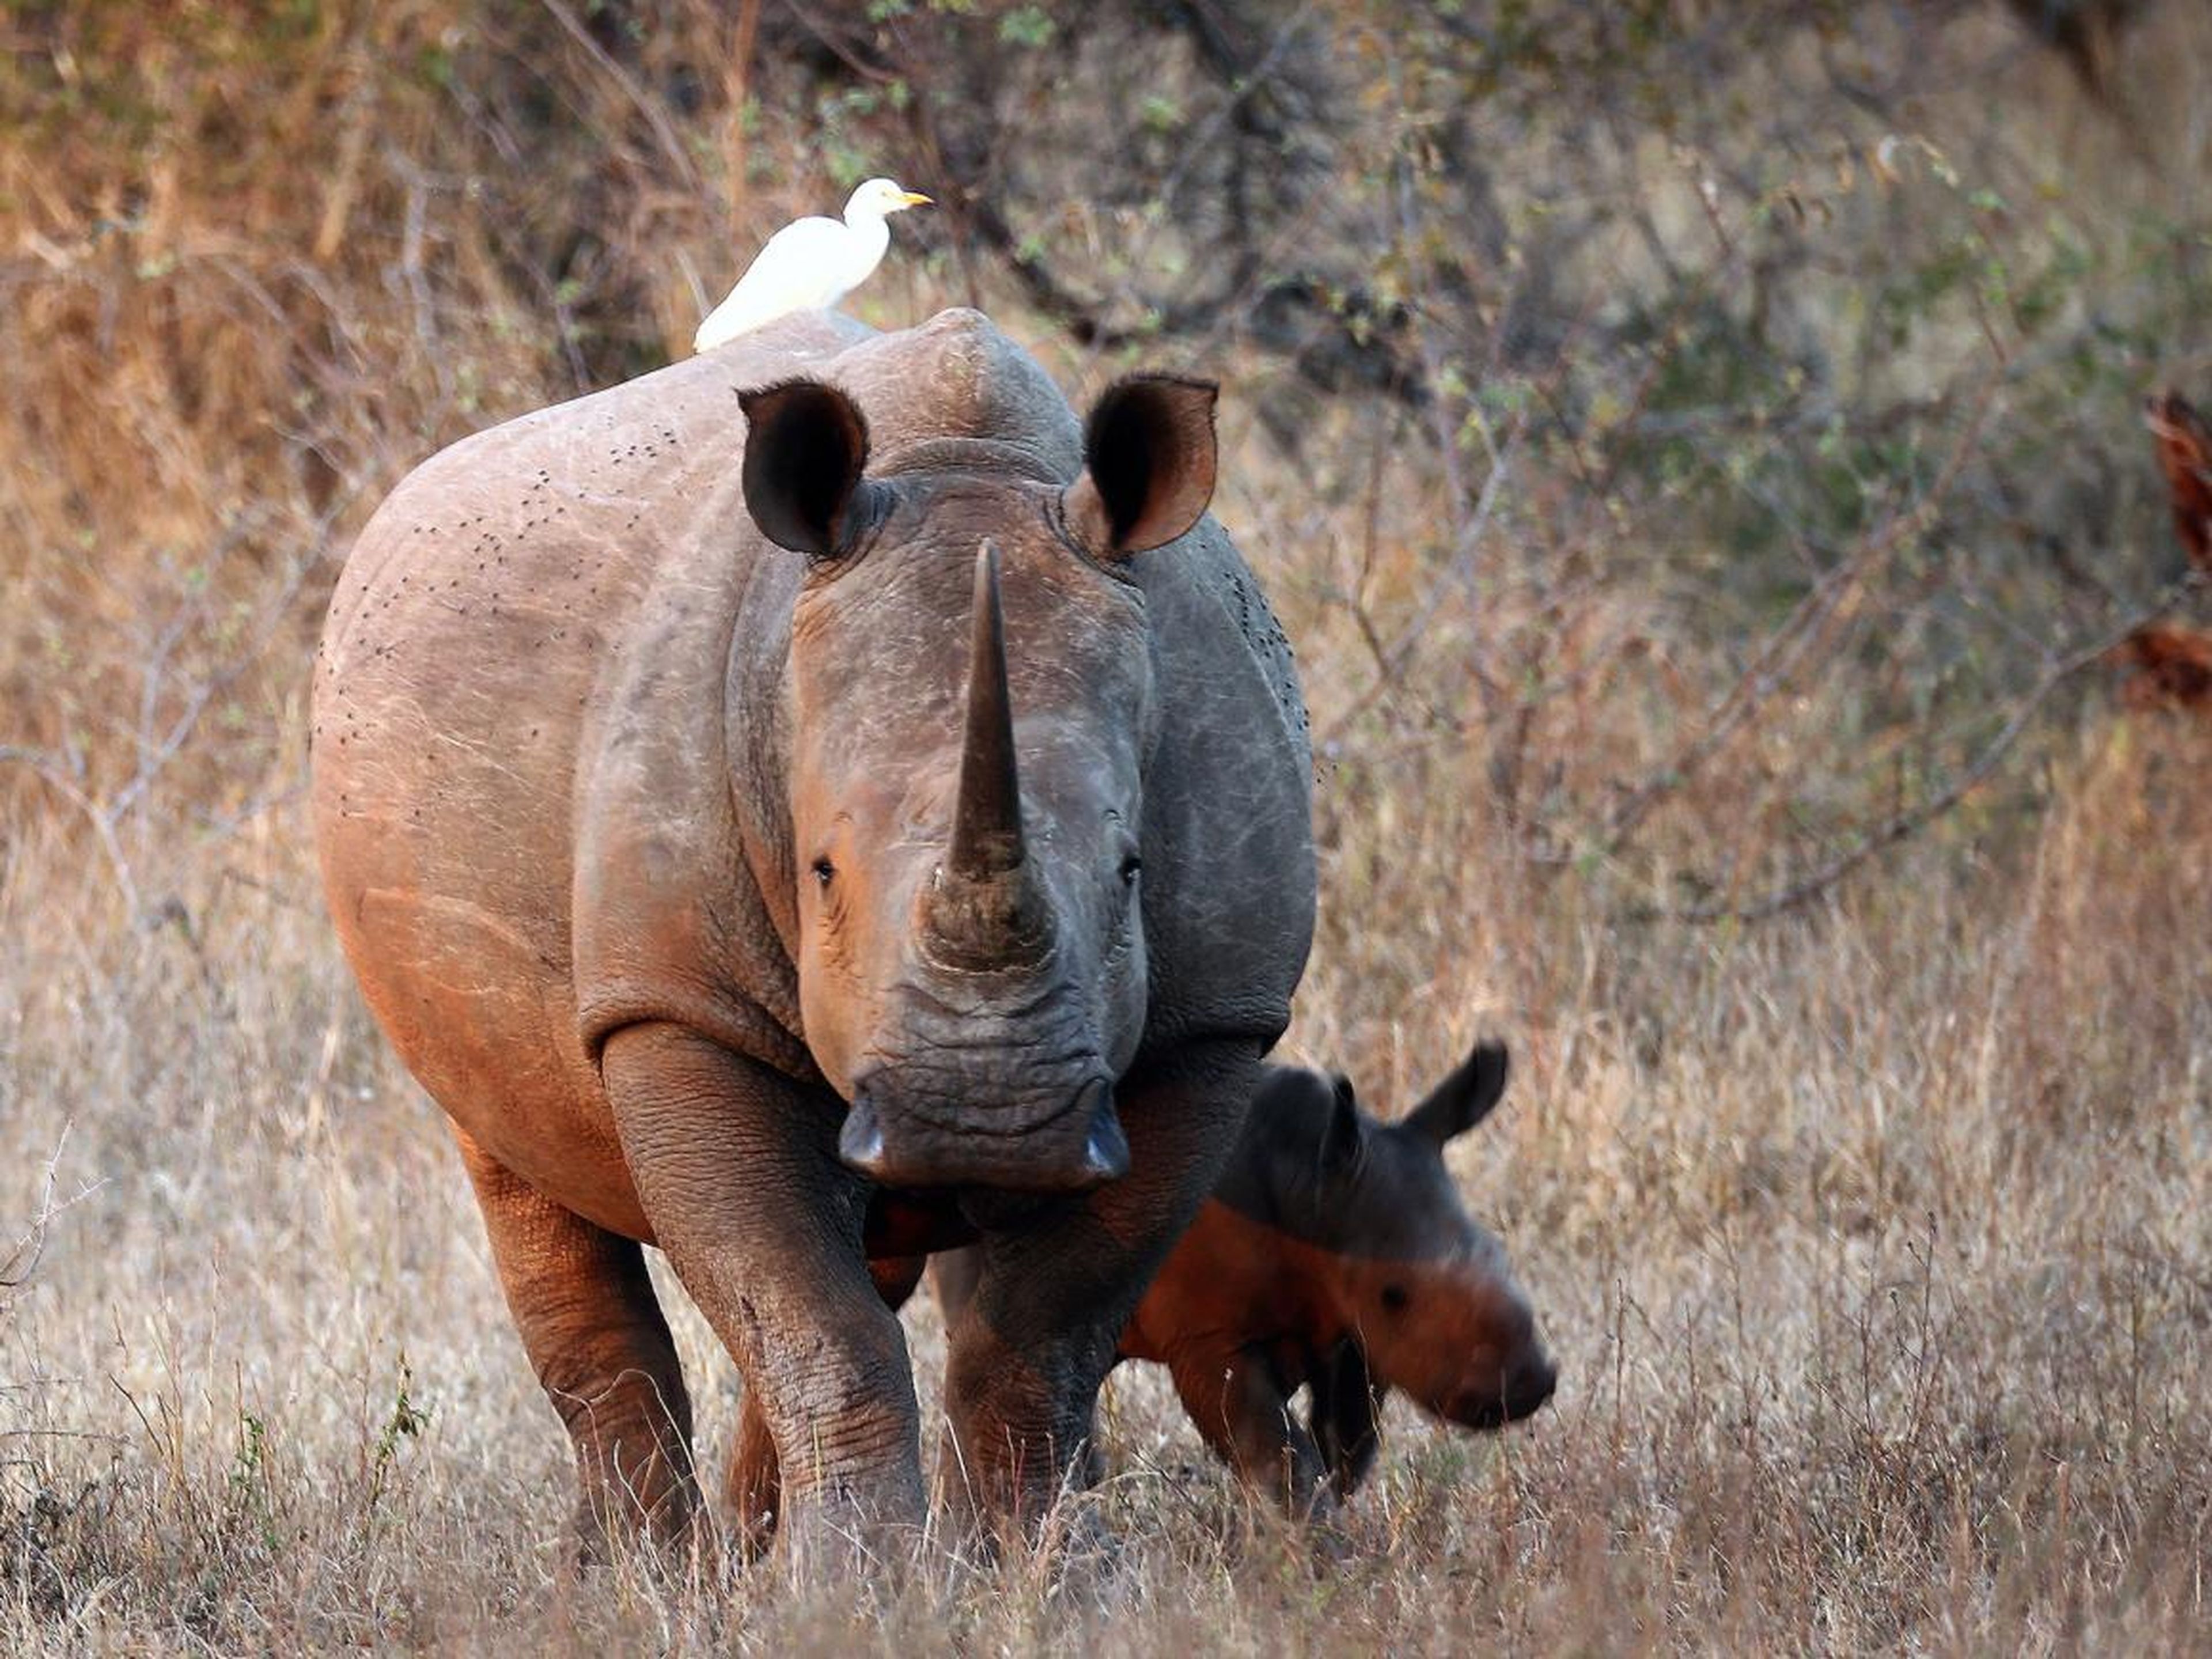 Both brothers are big game hunters, which can be very expensive. A 14-day white rhino hunt can cost $66,790.